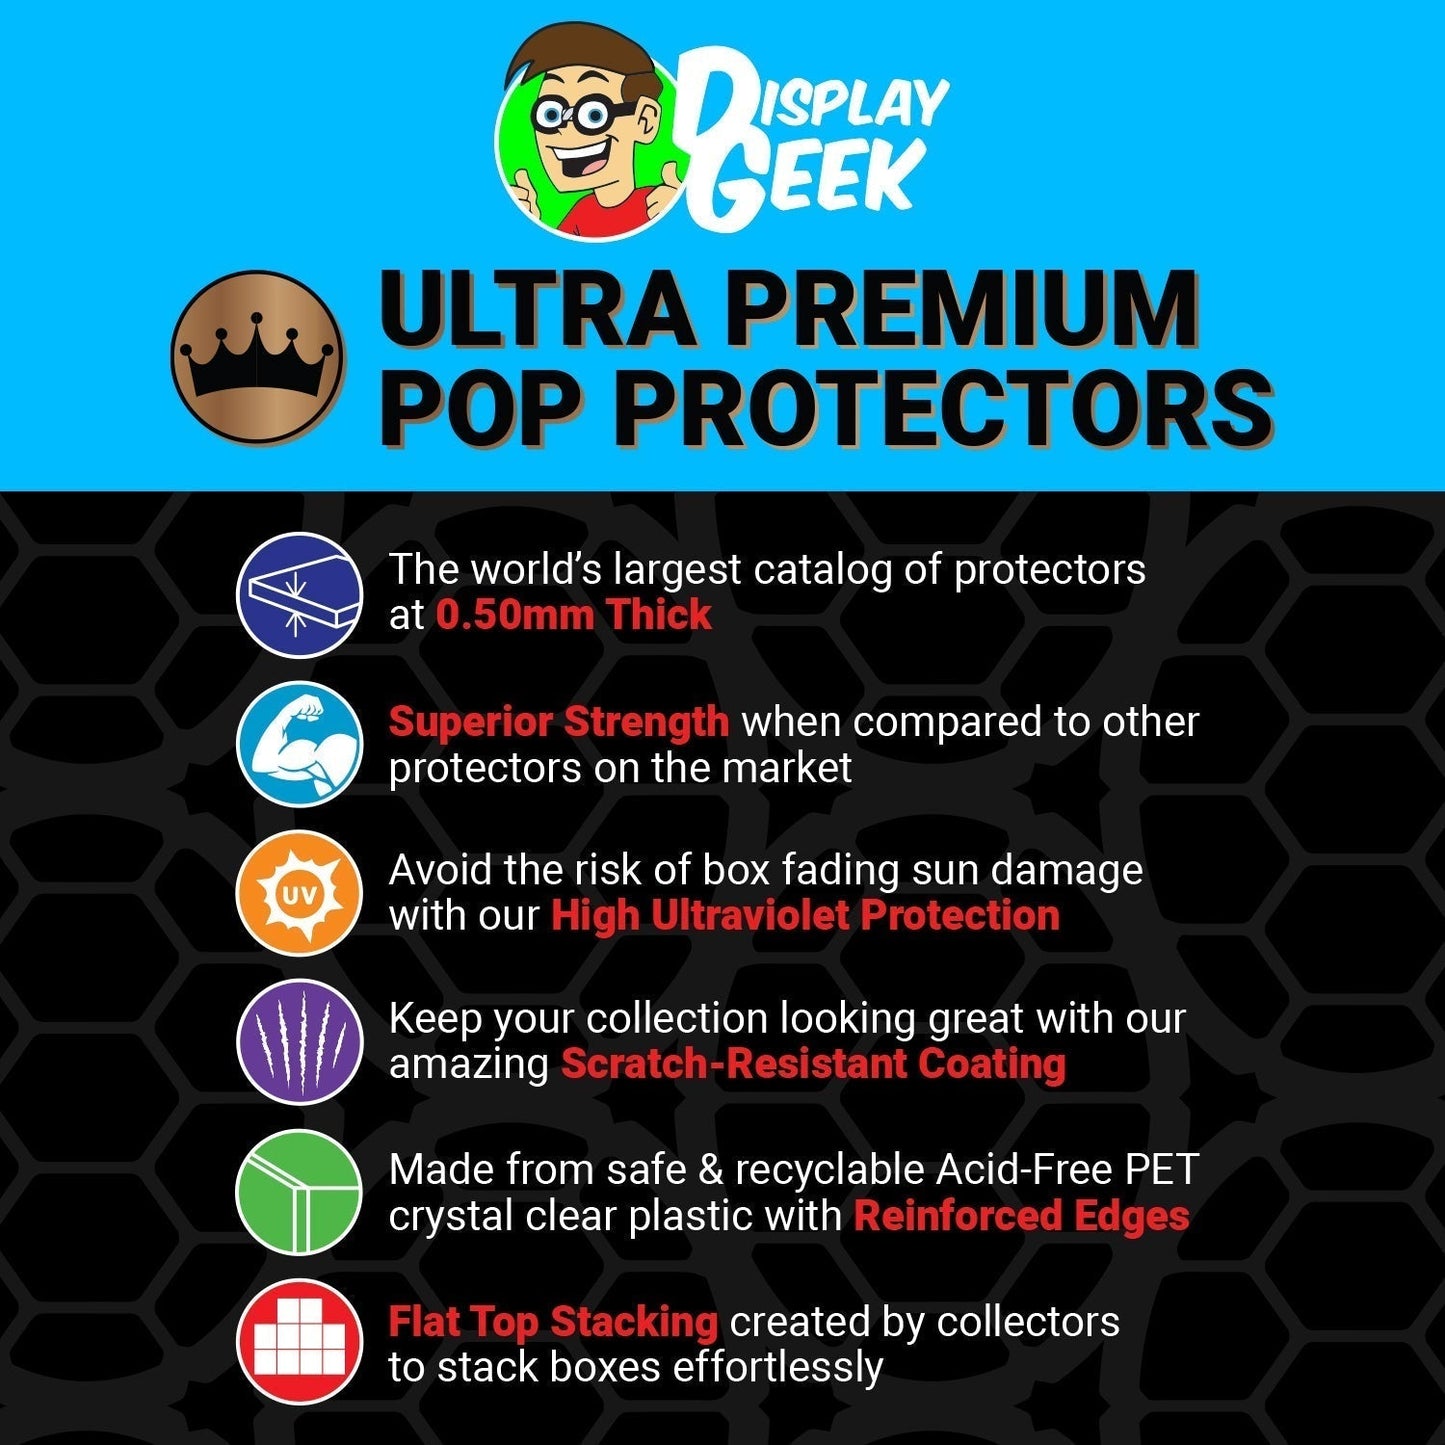 Pop Protector for Vynl 2 Pack Prince Akeem & Randy Watson NYCC Funko - PPG Pop Protector Guide Search Created by Display Geek